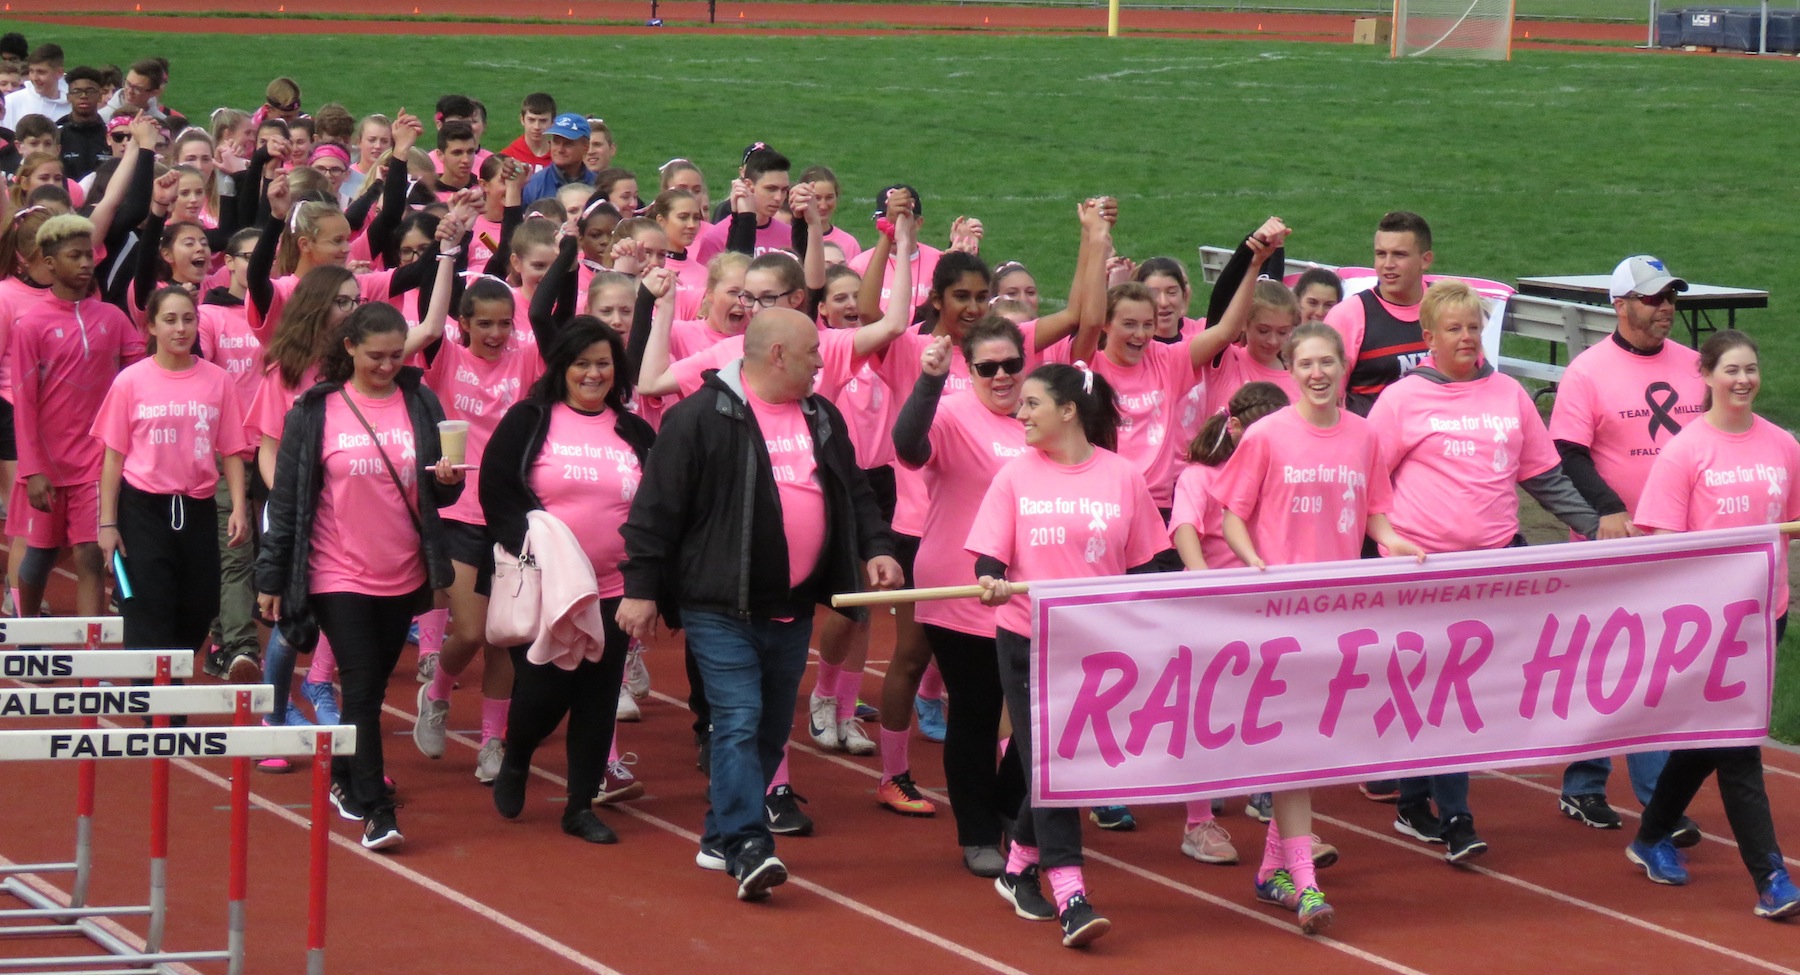 During an honorary lap, the Niagara-Wheatfield track and field team crosses the finish line alongside cancer survivors and fighters at a `Race for Hope.` (Photos by David Yarger)